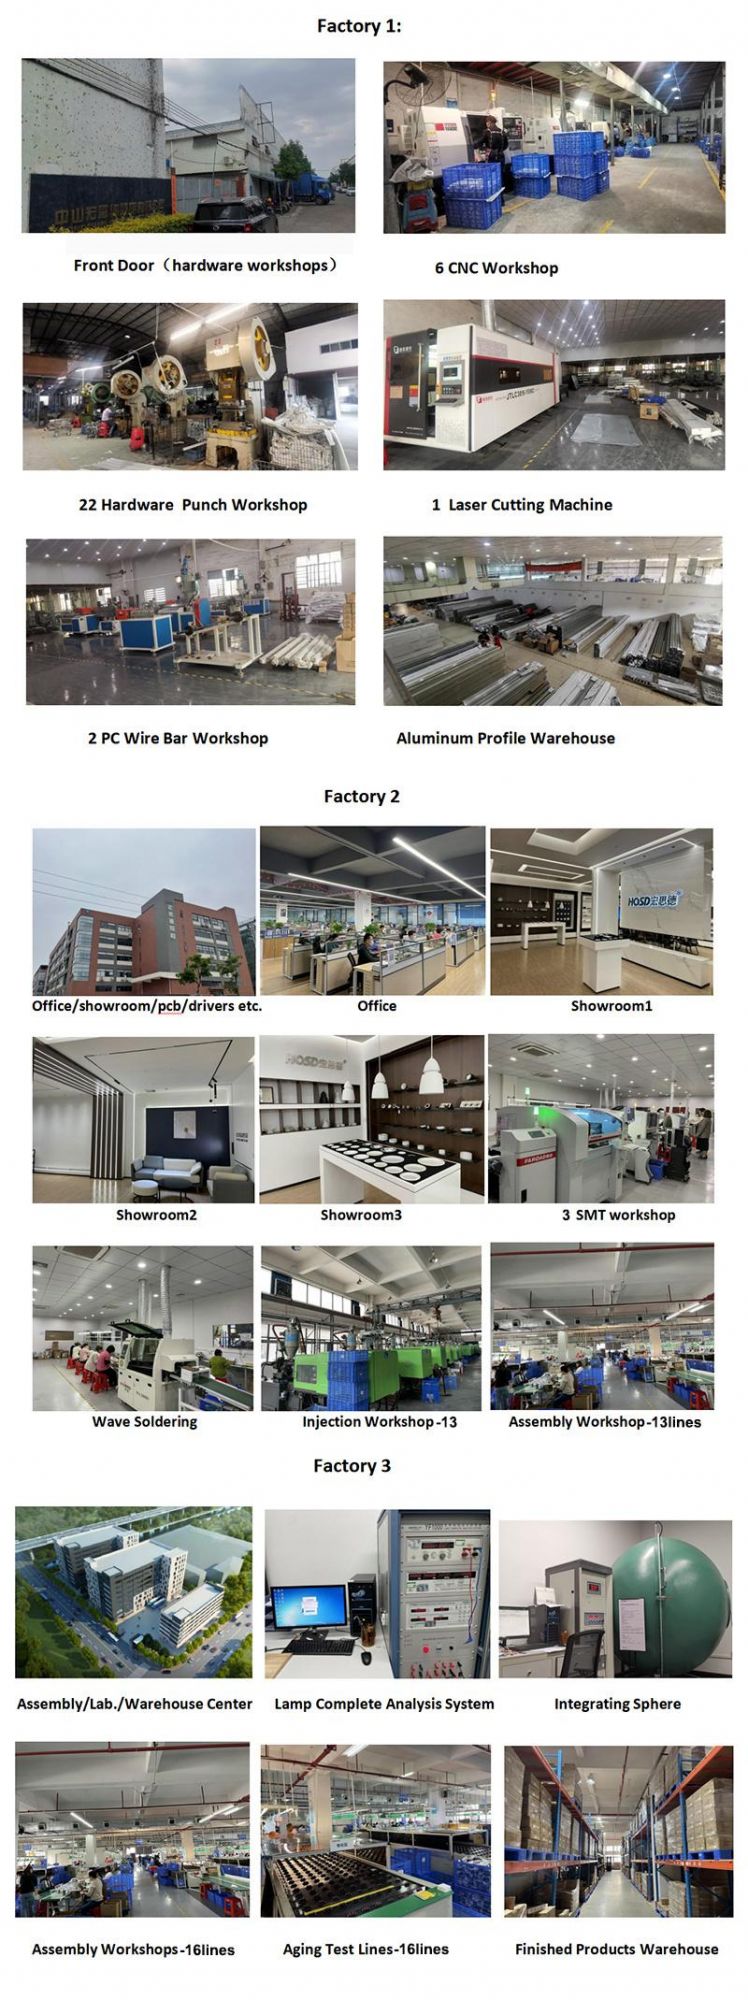 High Level Commercial Shops Stores Office Mounted Pendant Linkable LED Linear Light